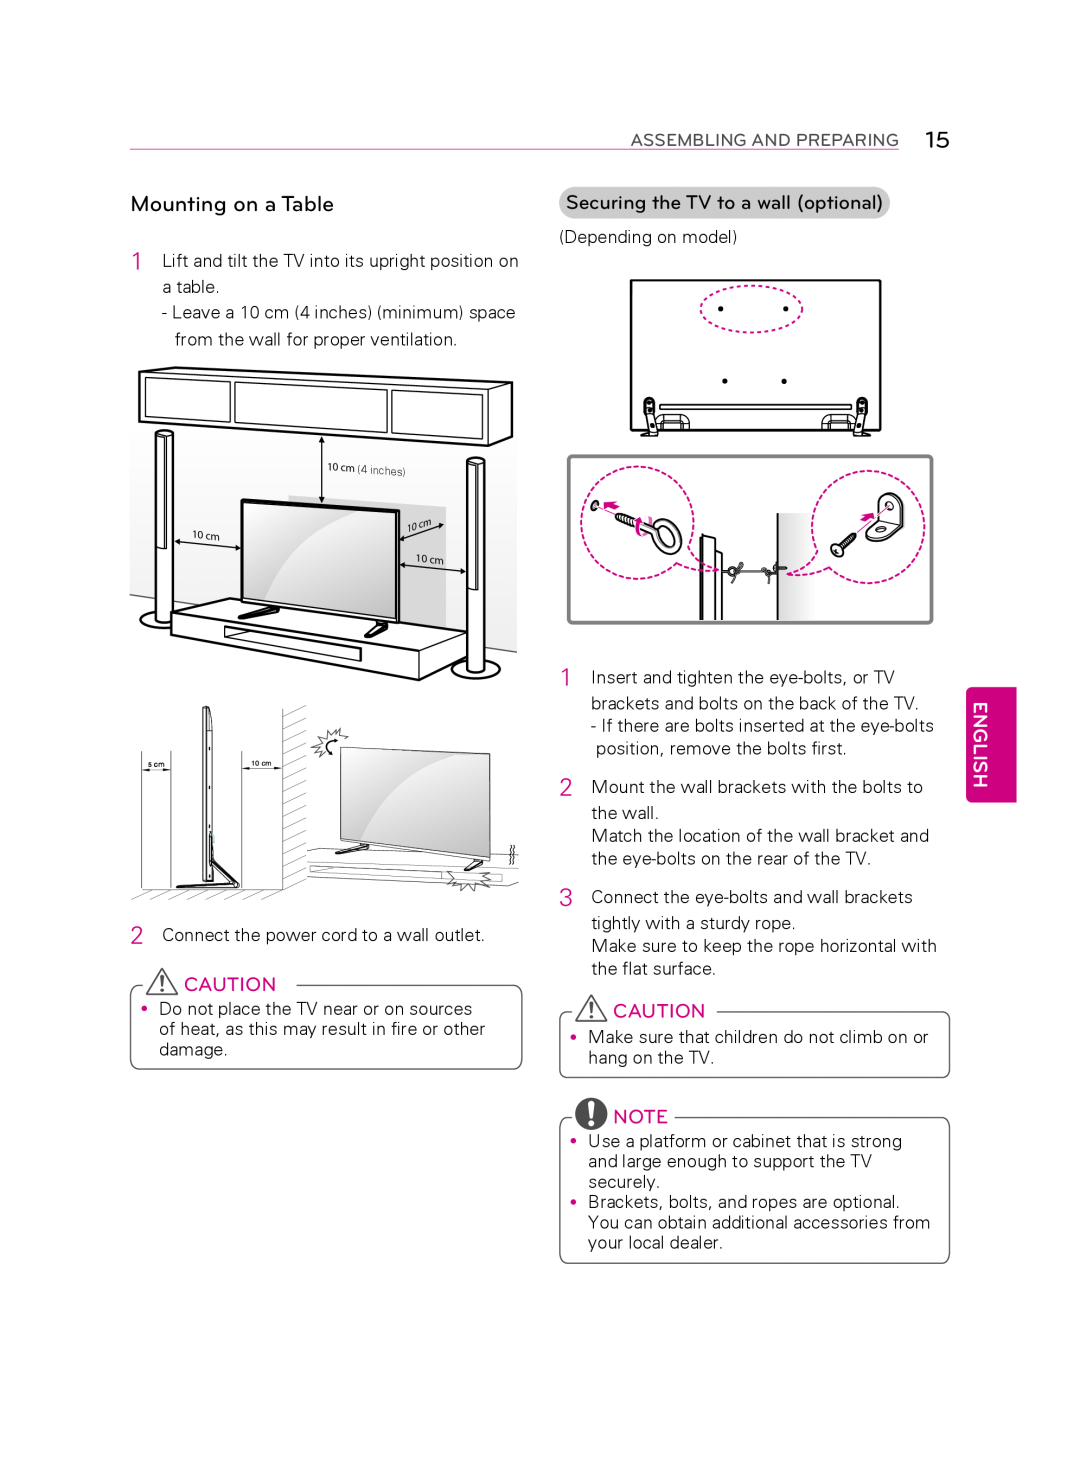 LG Electronics 55LA9650 Mounting on a table, English, Assembling And Preparing, Connect the power cord to a wall outlet 